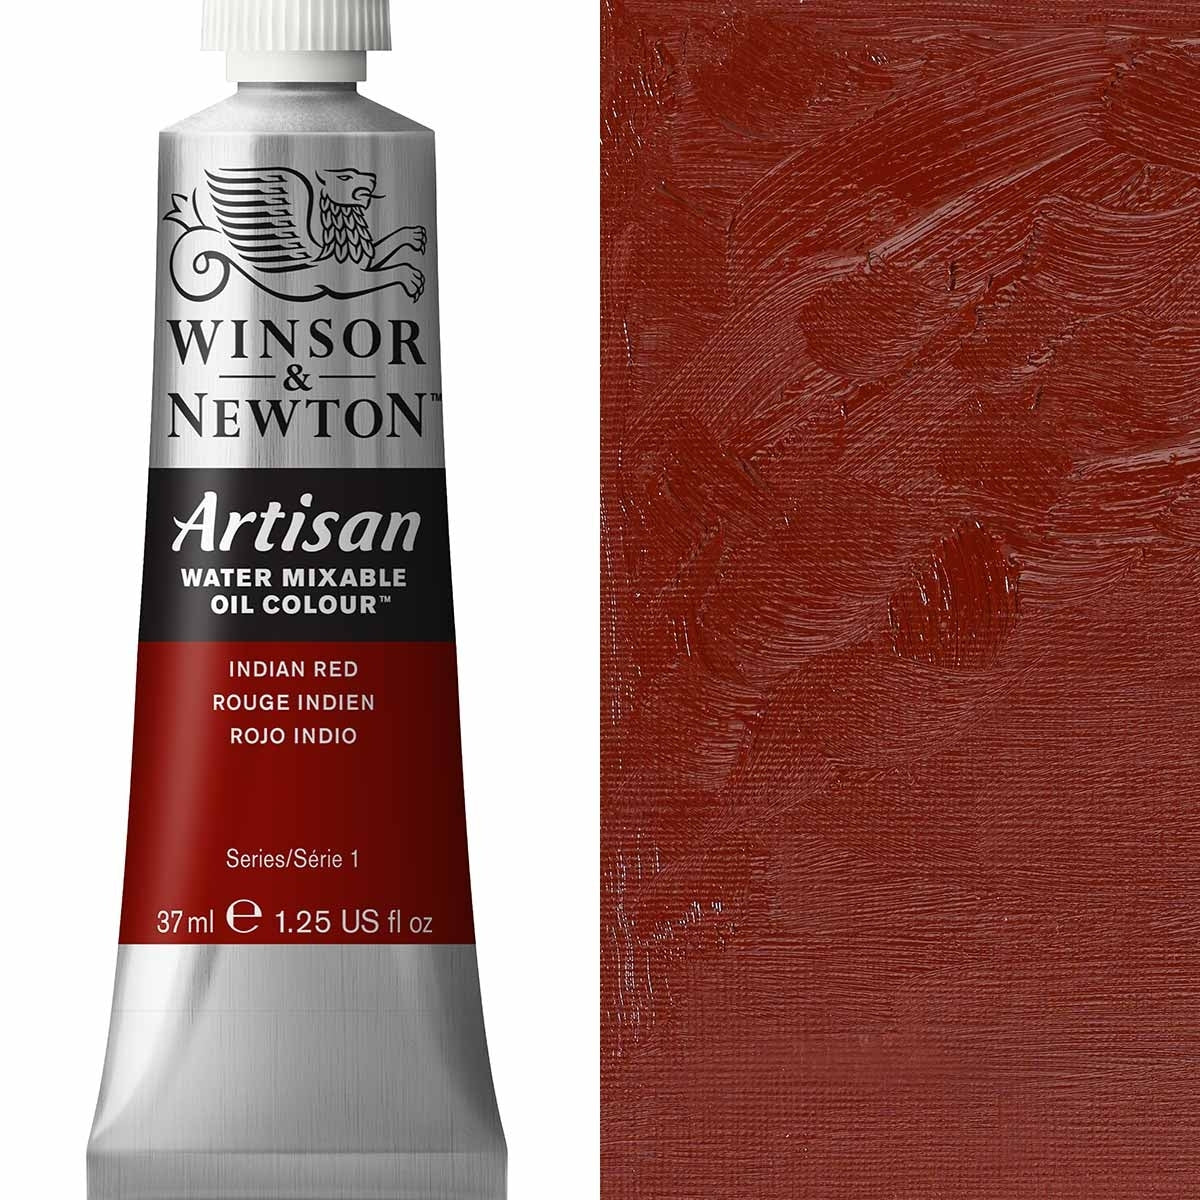 Winsor en Newton - Artisan Oil Color Water Mixable - 37 ml - Indian Red